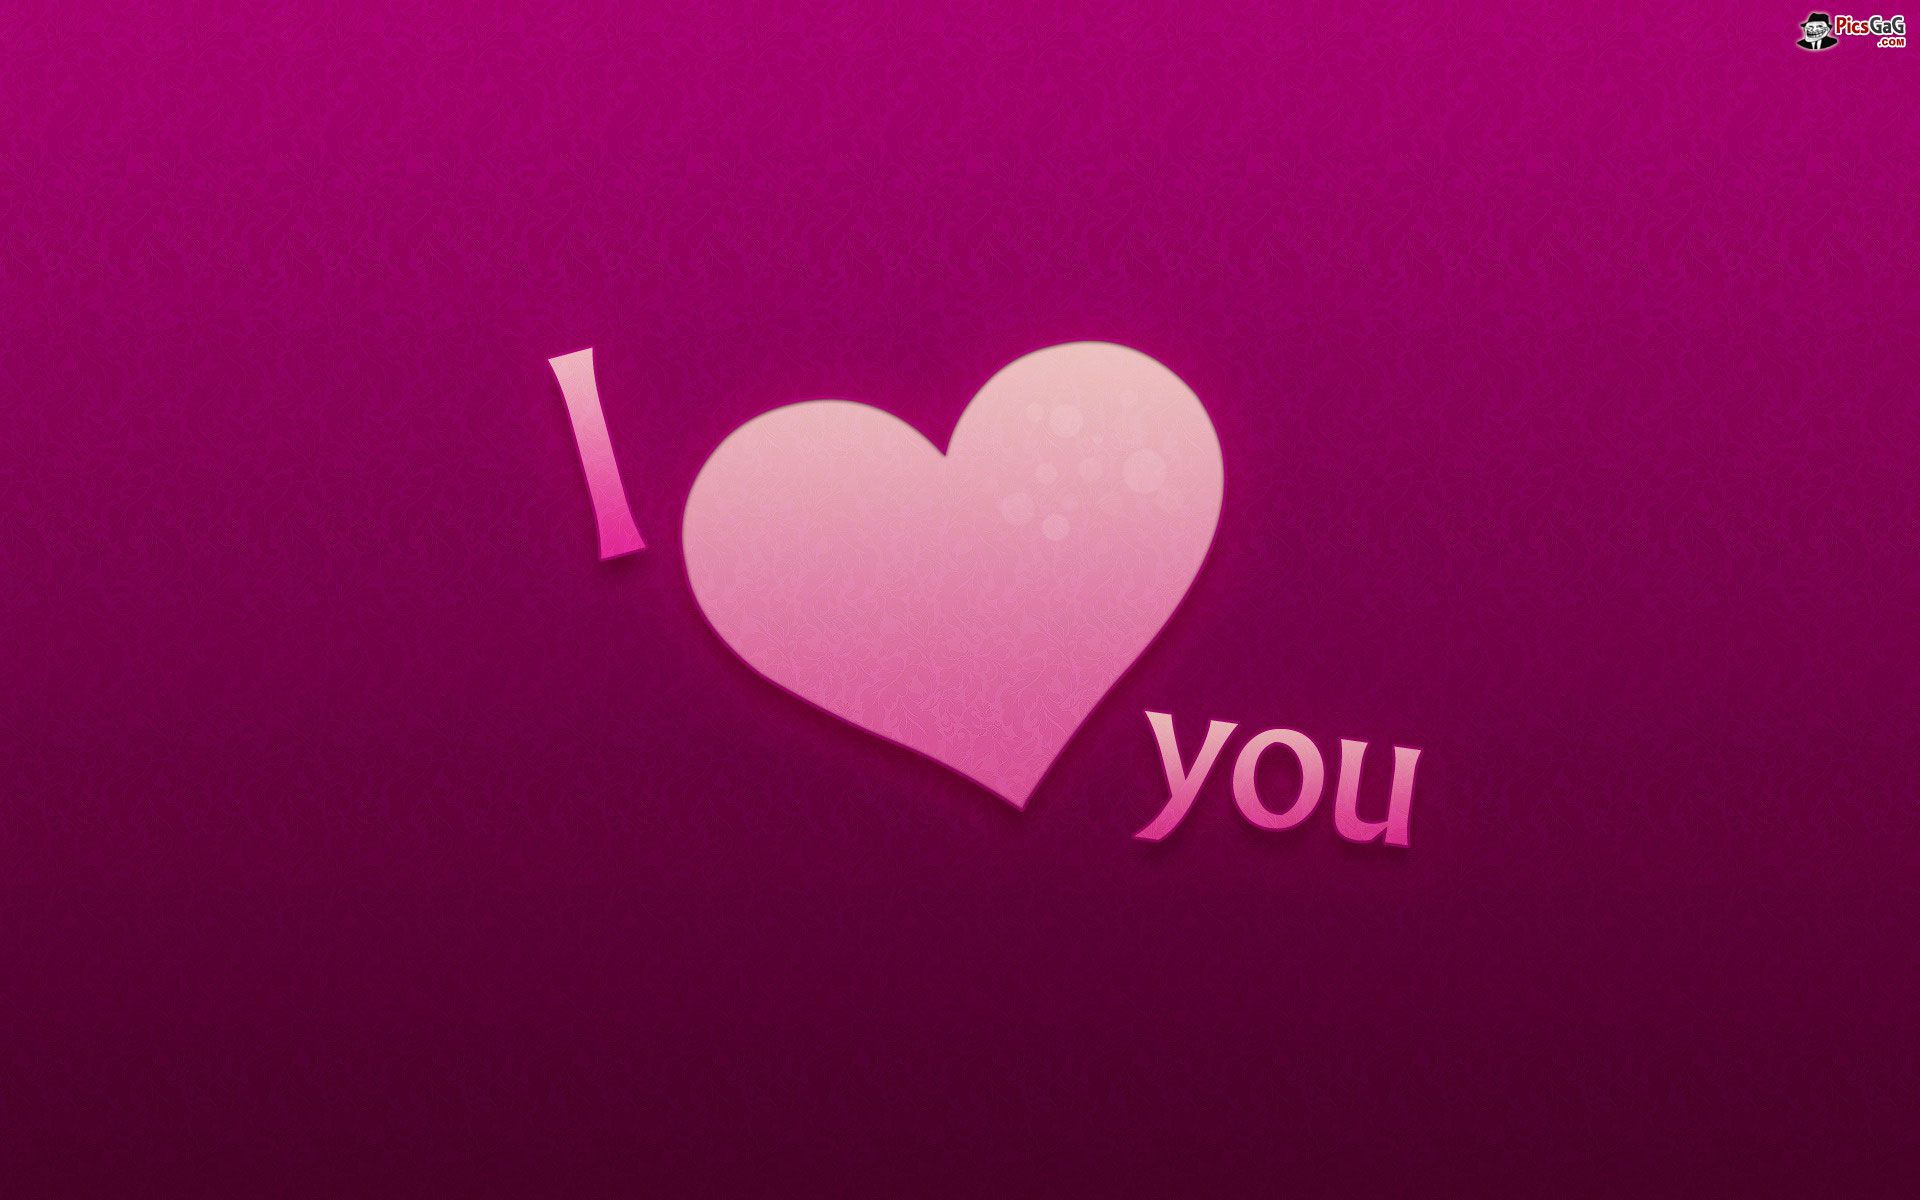 love heart wallpaper - AmusingFun.com | Pictures and Graphics for ...